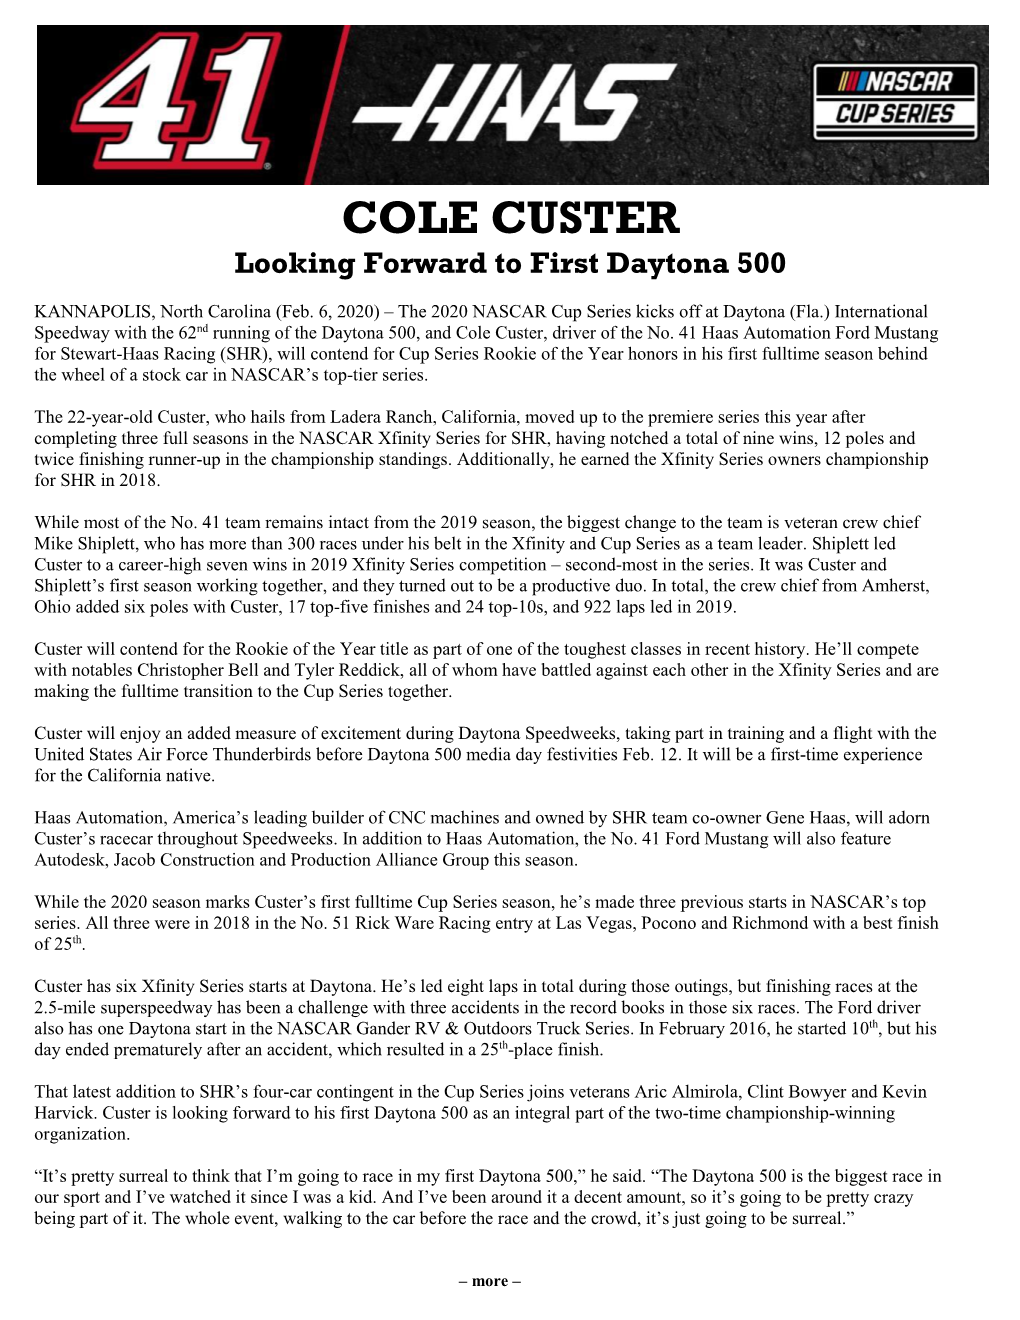 COLE CUSTER Looking Forward to First Daytona 500